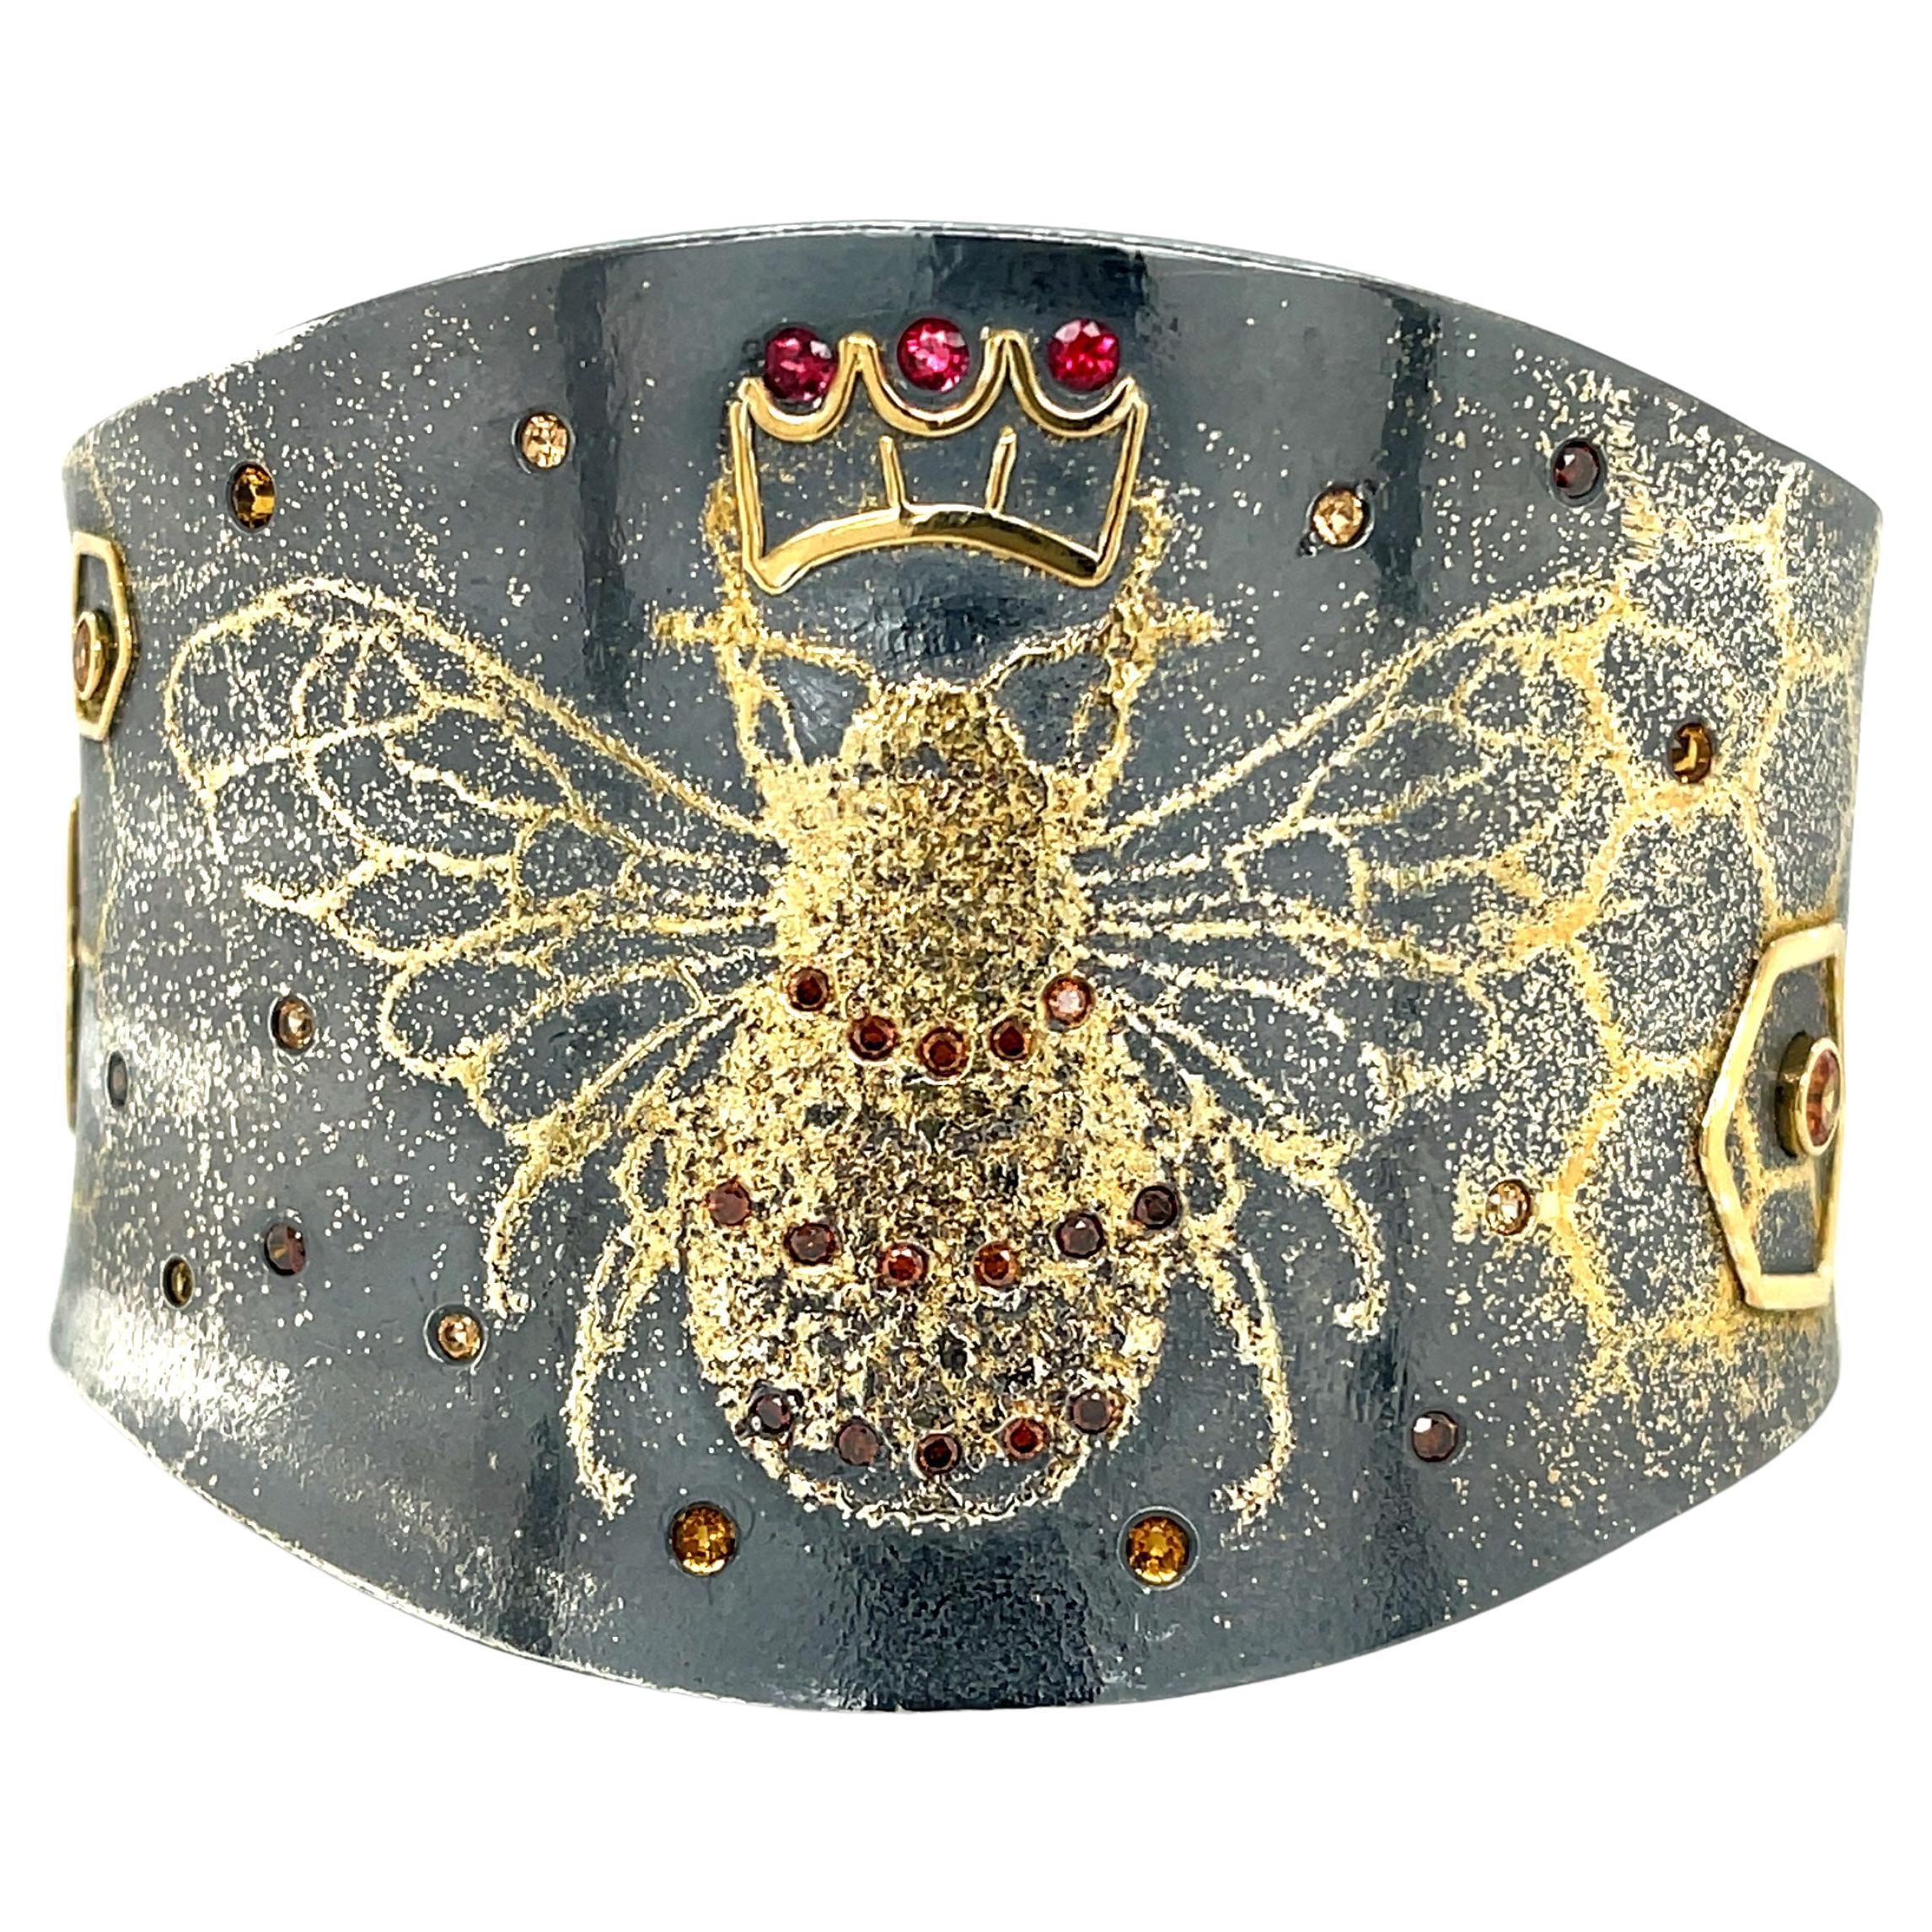 "Bee Strong" Cuff Bracelet with Oxidized Sterling Silver and 24Karat Gold Dust